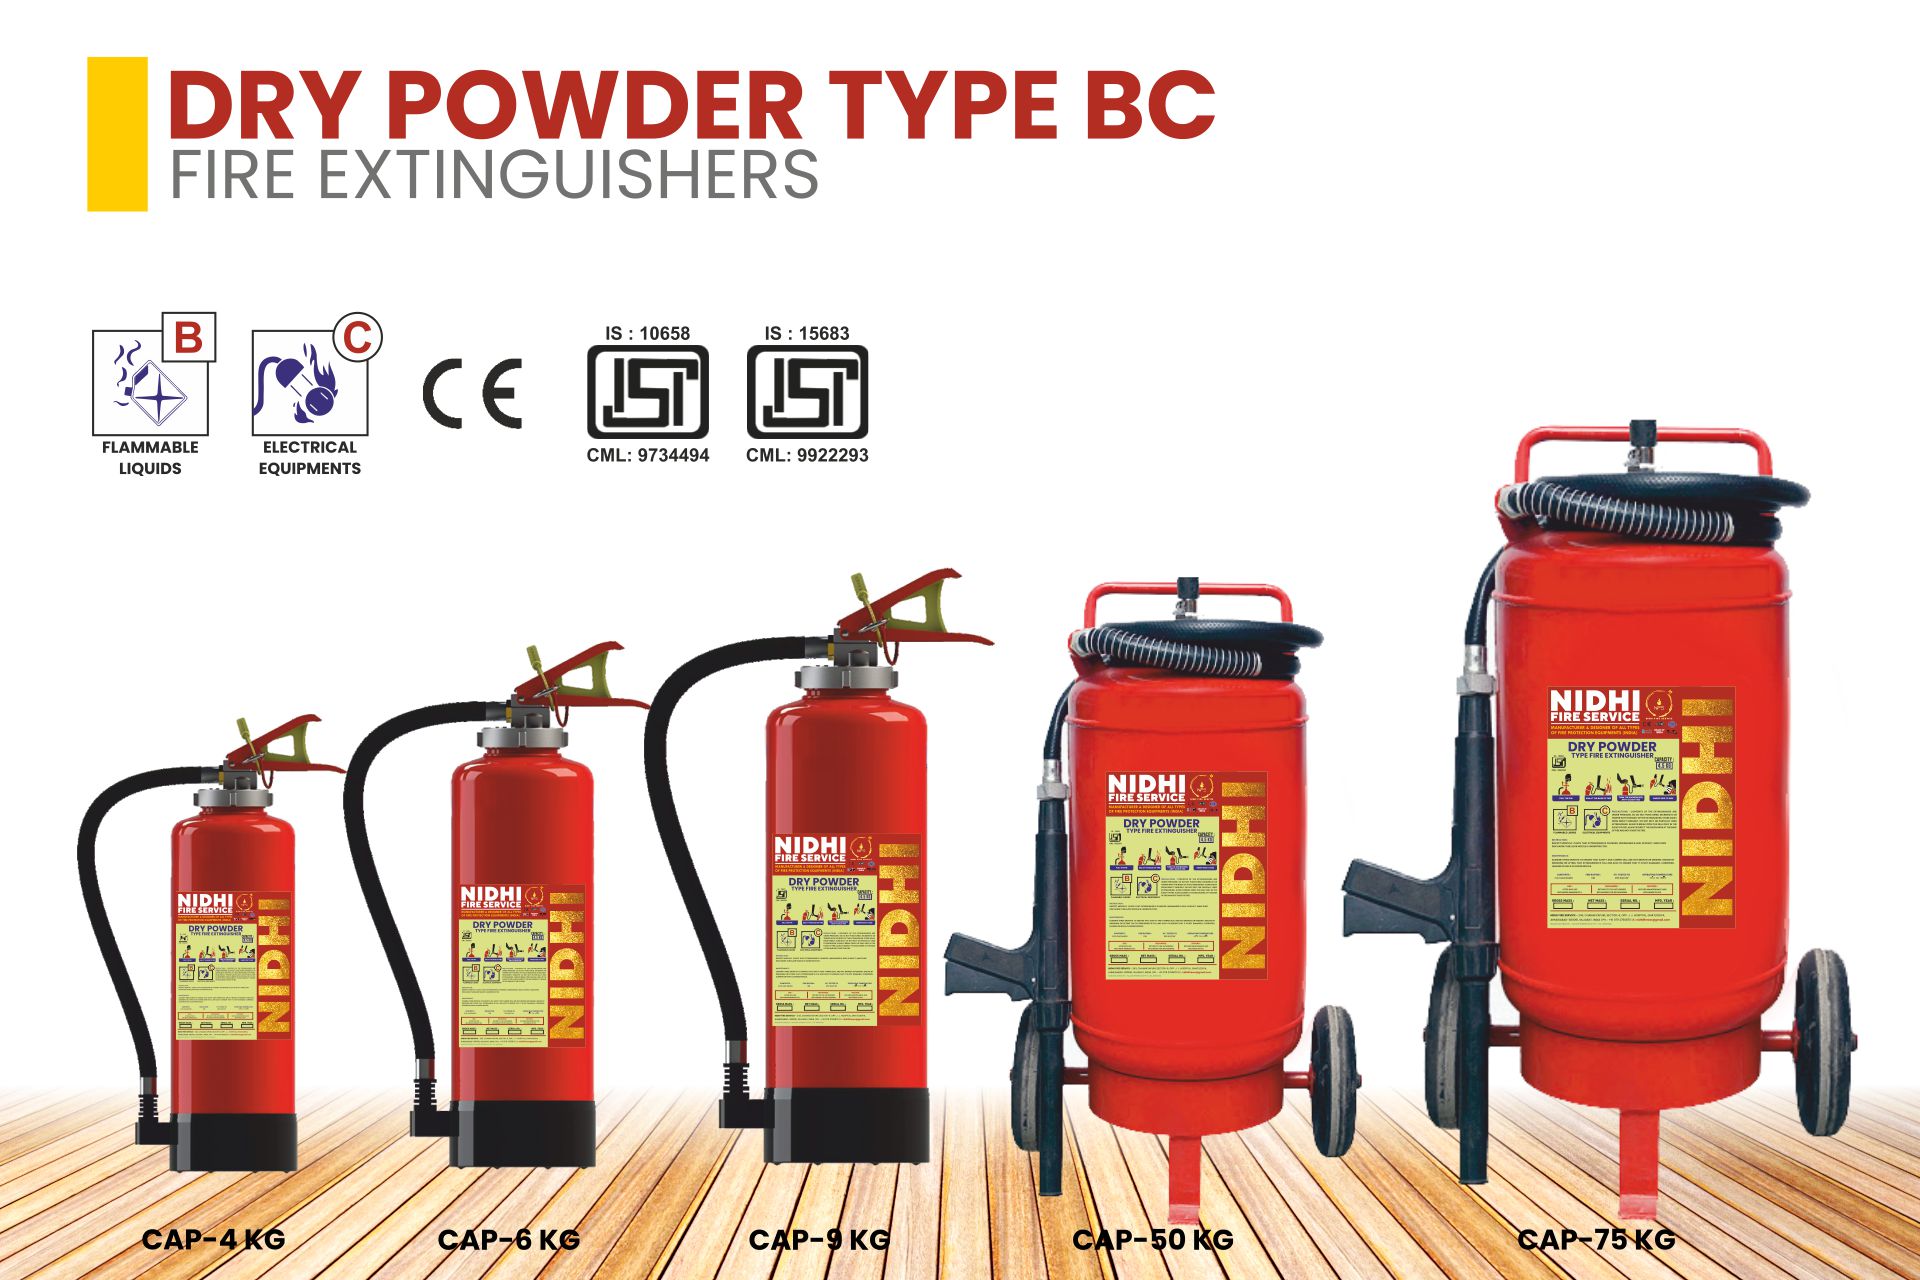 FIRE EXTINGUISHERS Product 3